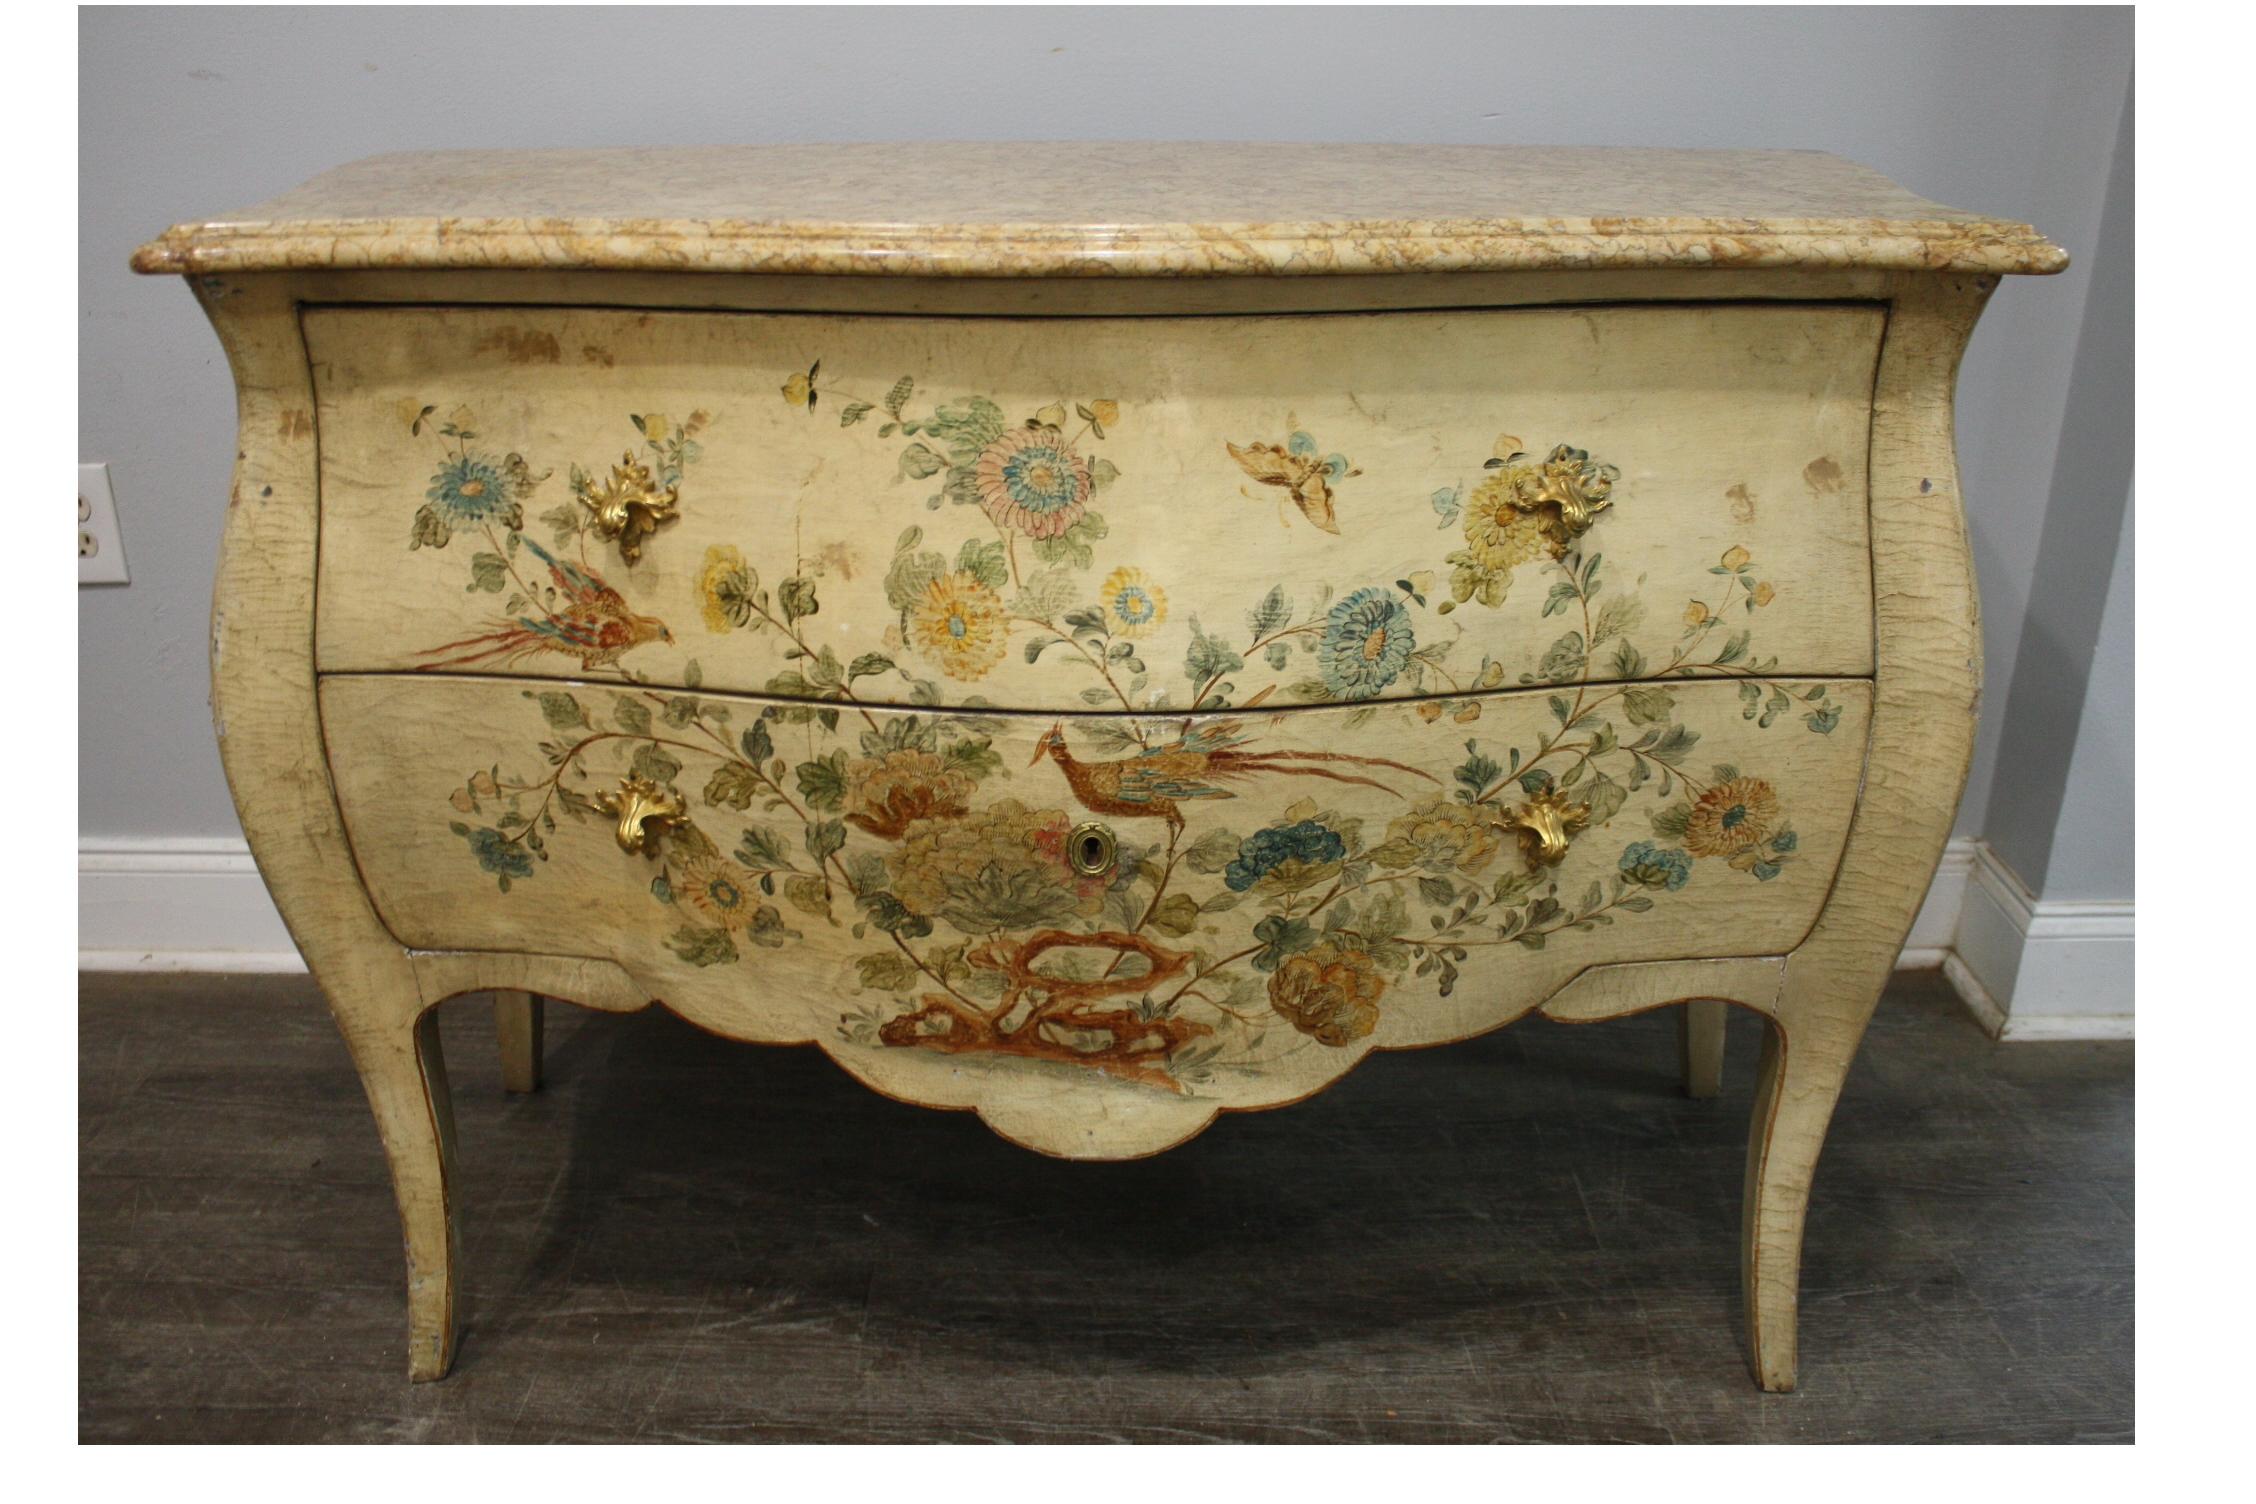 Wonderful commode Lacquered and painted with birds and plants with a marble top. Very rafraishing.